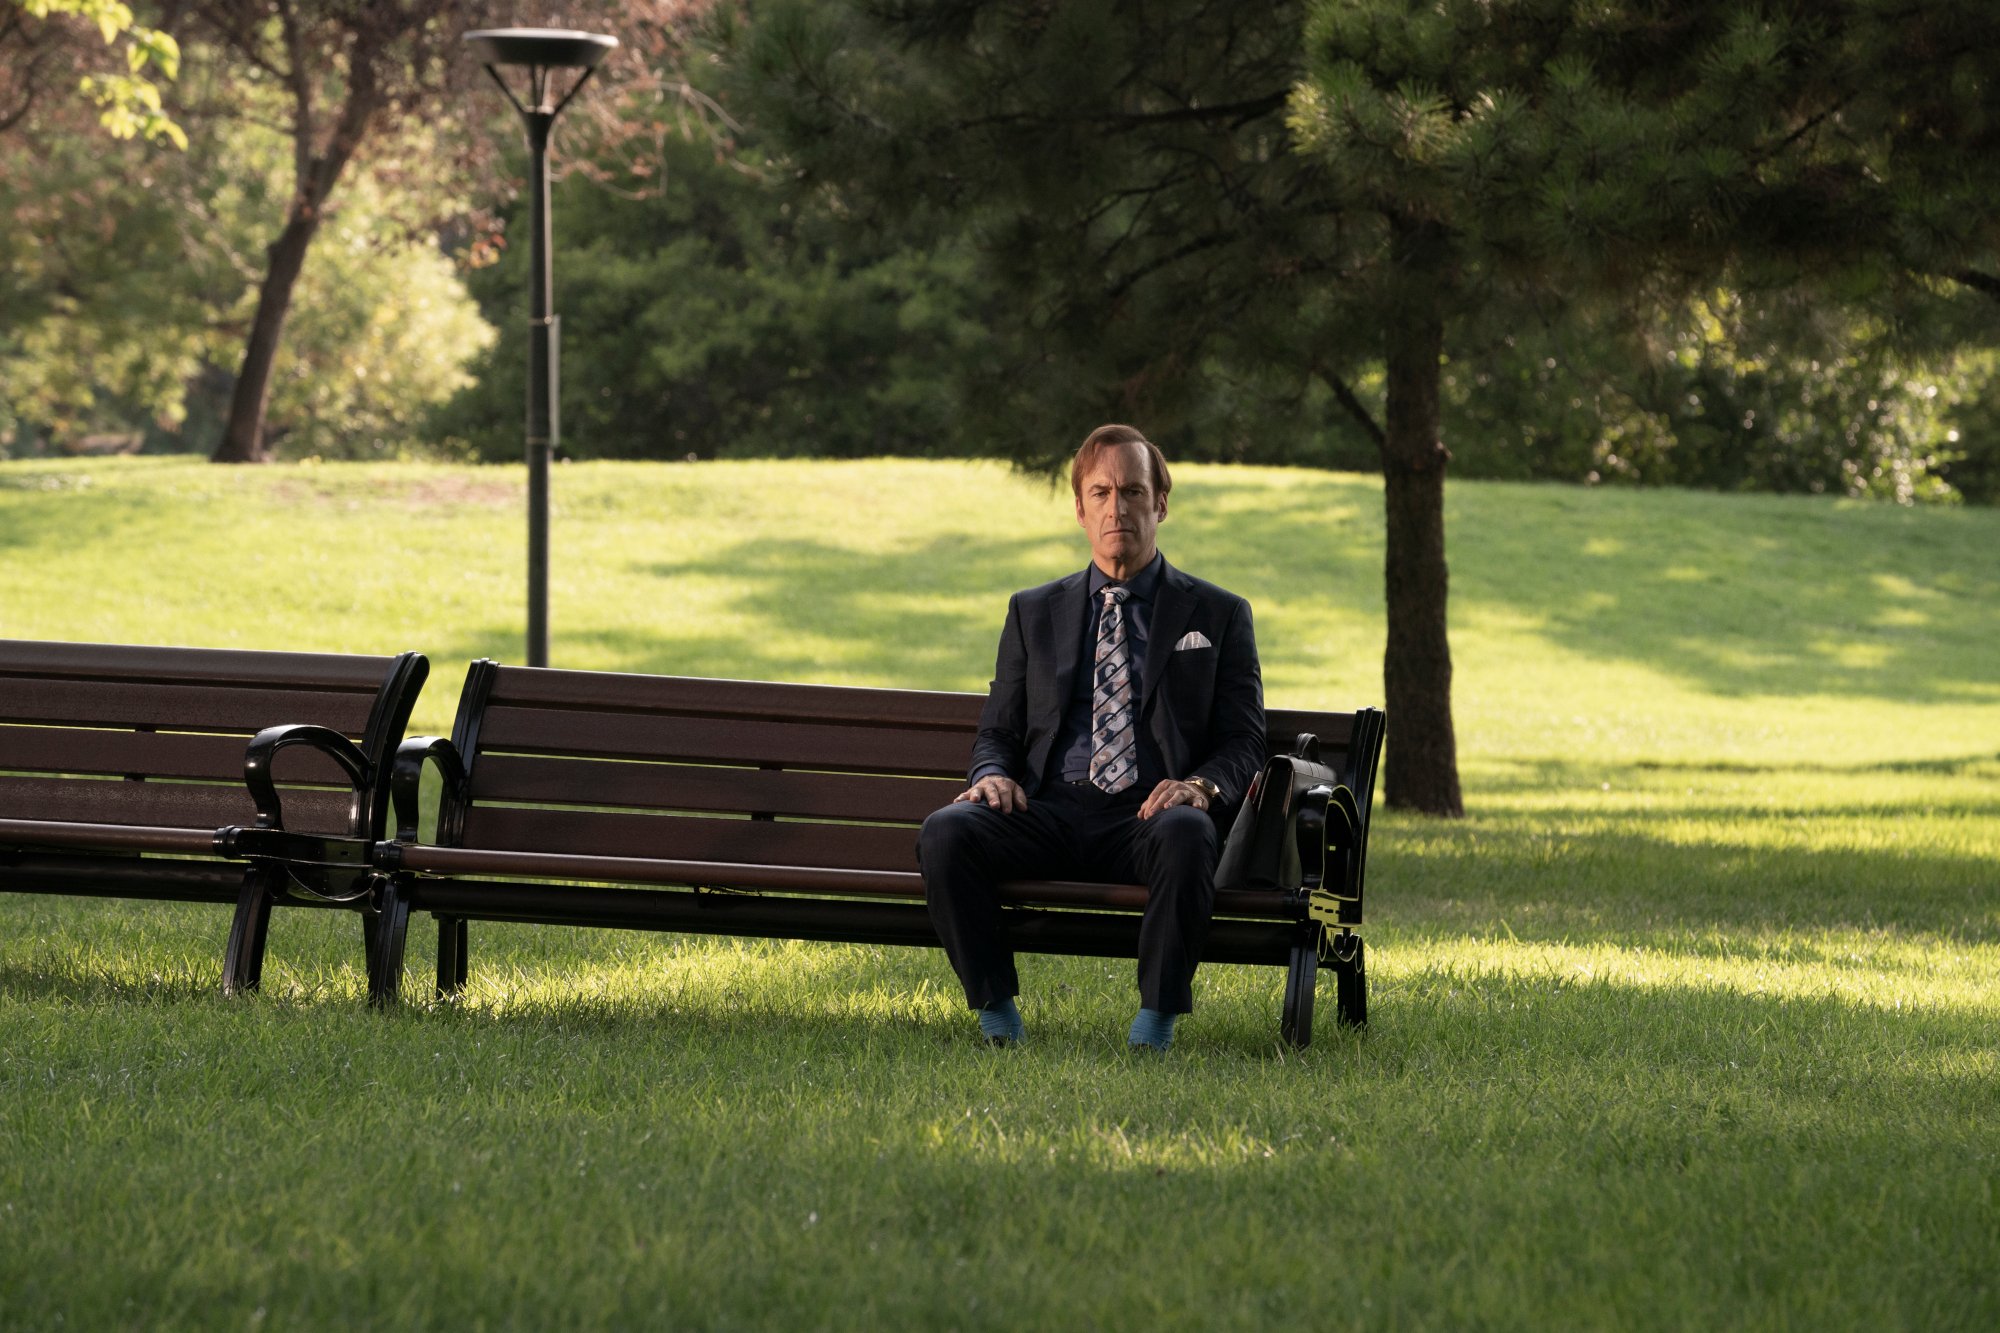 Bob Odenkirk as Saul Goodman in 'Better Call Saul' Season 6, which viewers can watch on AMC. He's sitting on a bench, and there's grass and greenery behind him.